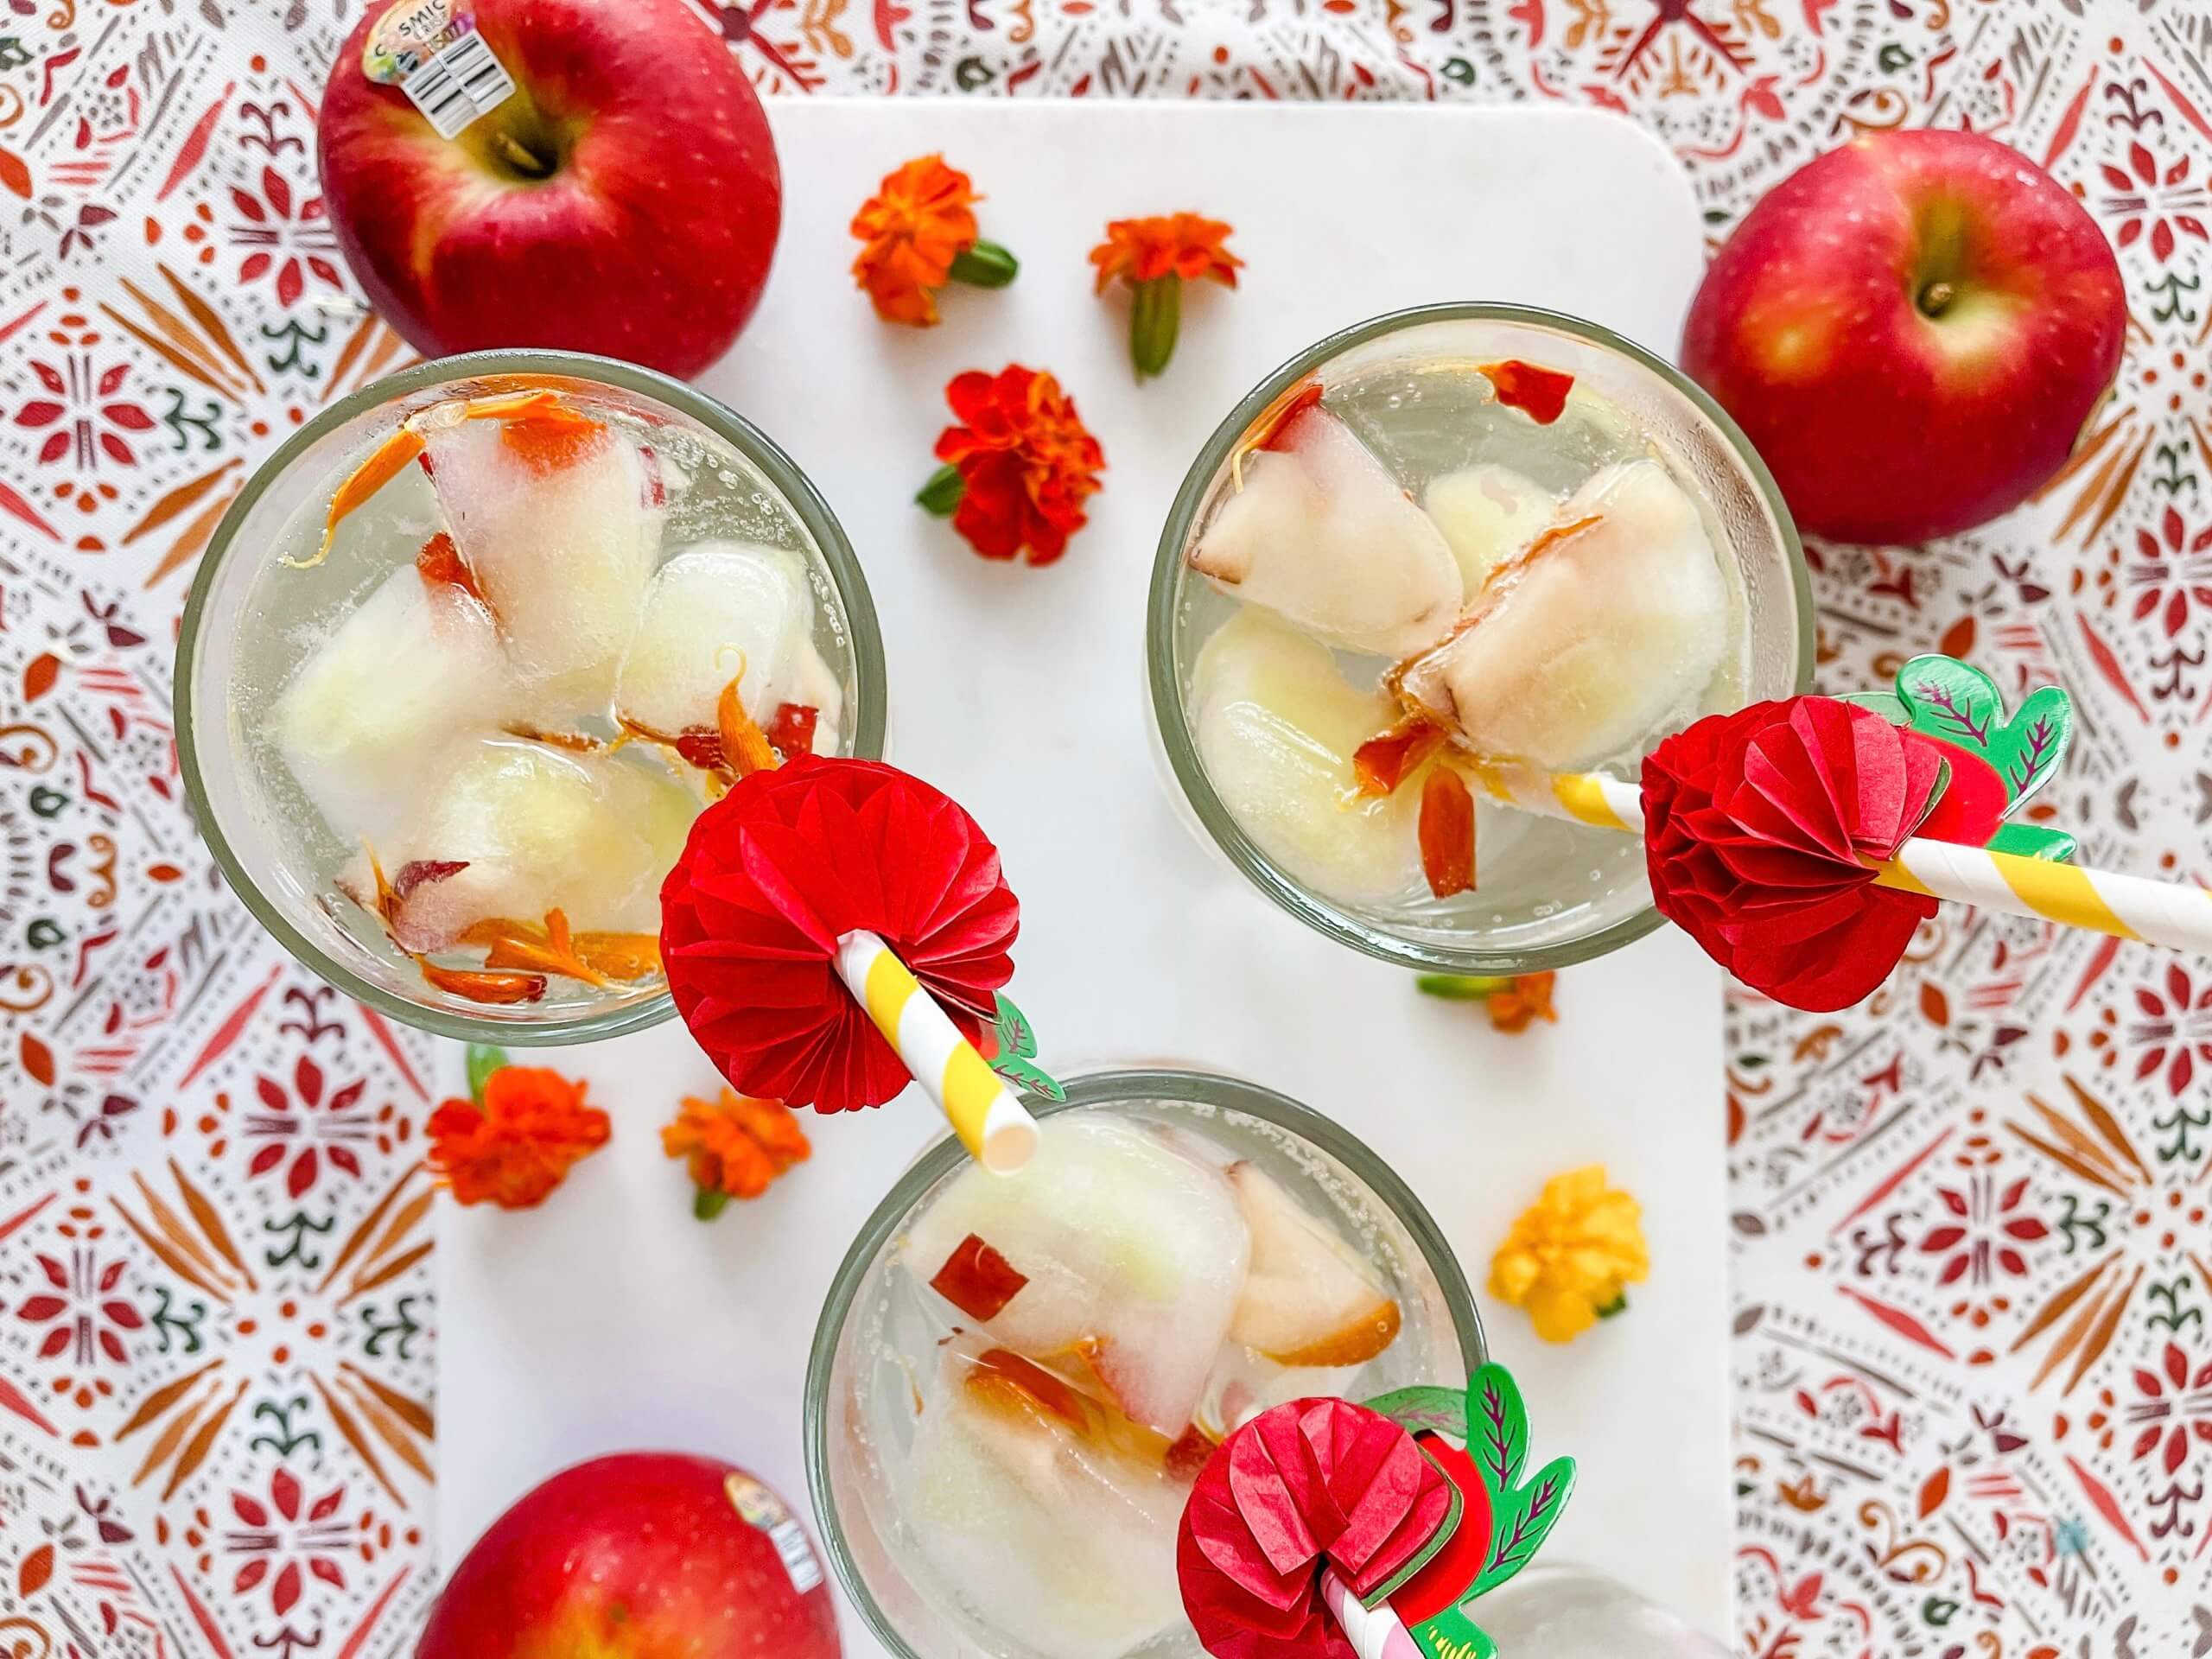 Cosmic Crisp apples and glasses filled with water and Apple Blossom fruit ice cubes.